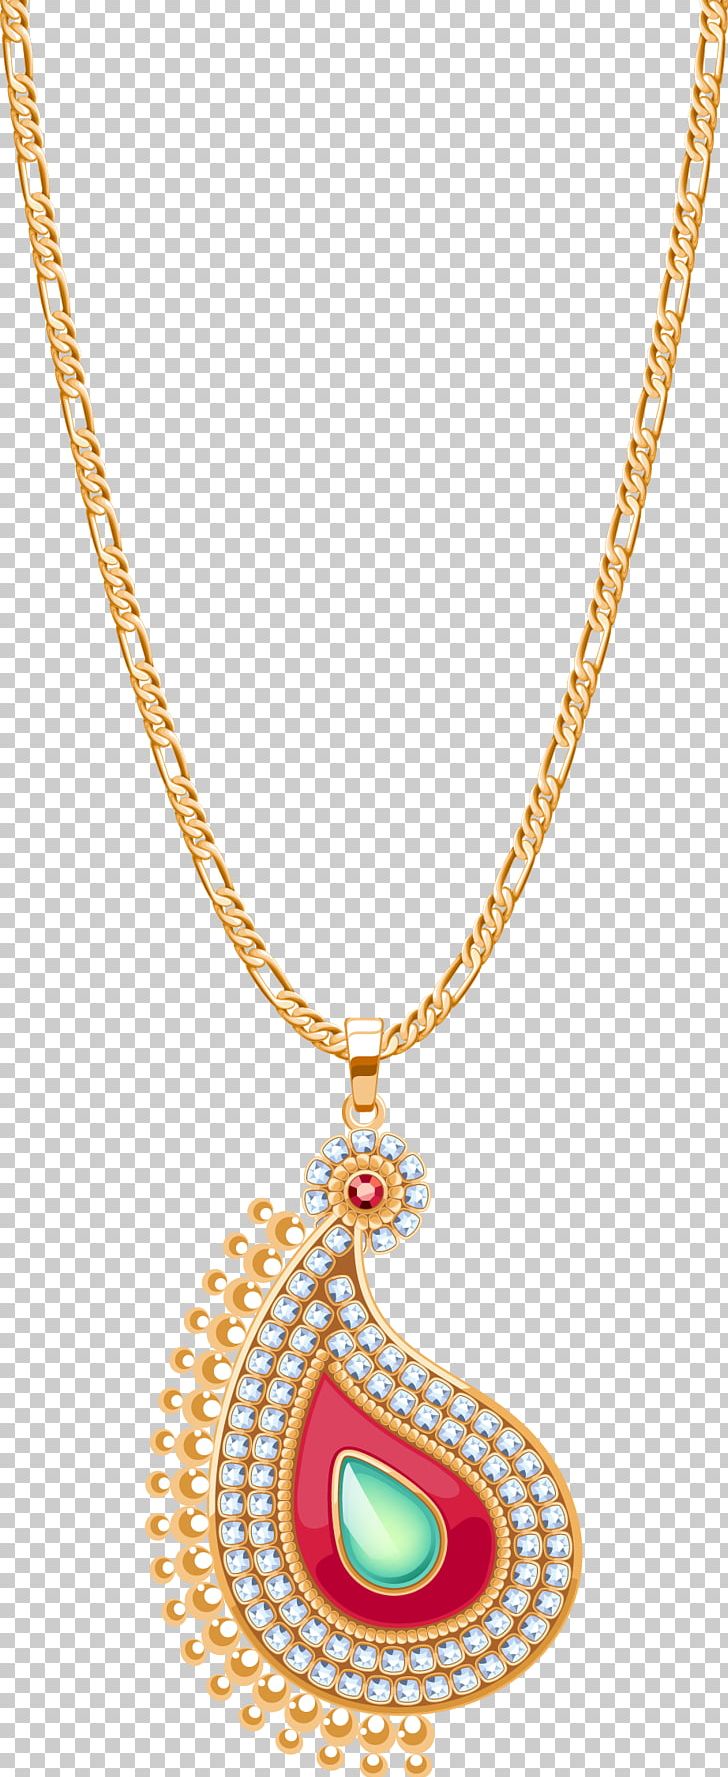 Locket Necklace Diamond Jewellery Gold PNG, Clipart, Bitxi, Body Jewelry, Bright, Brilliant, Chain Free PNG Download